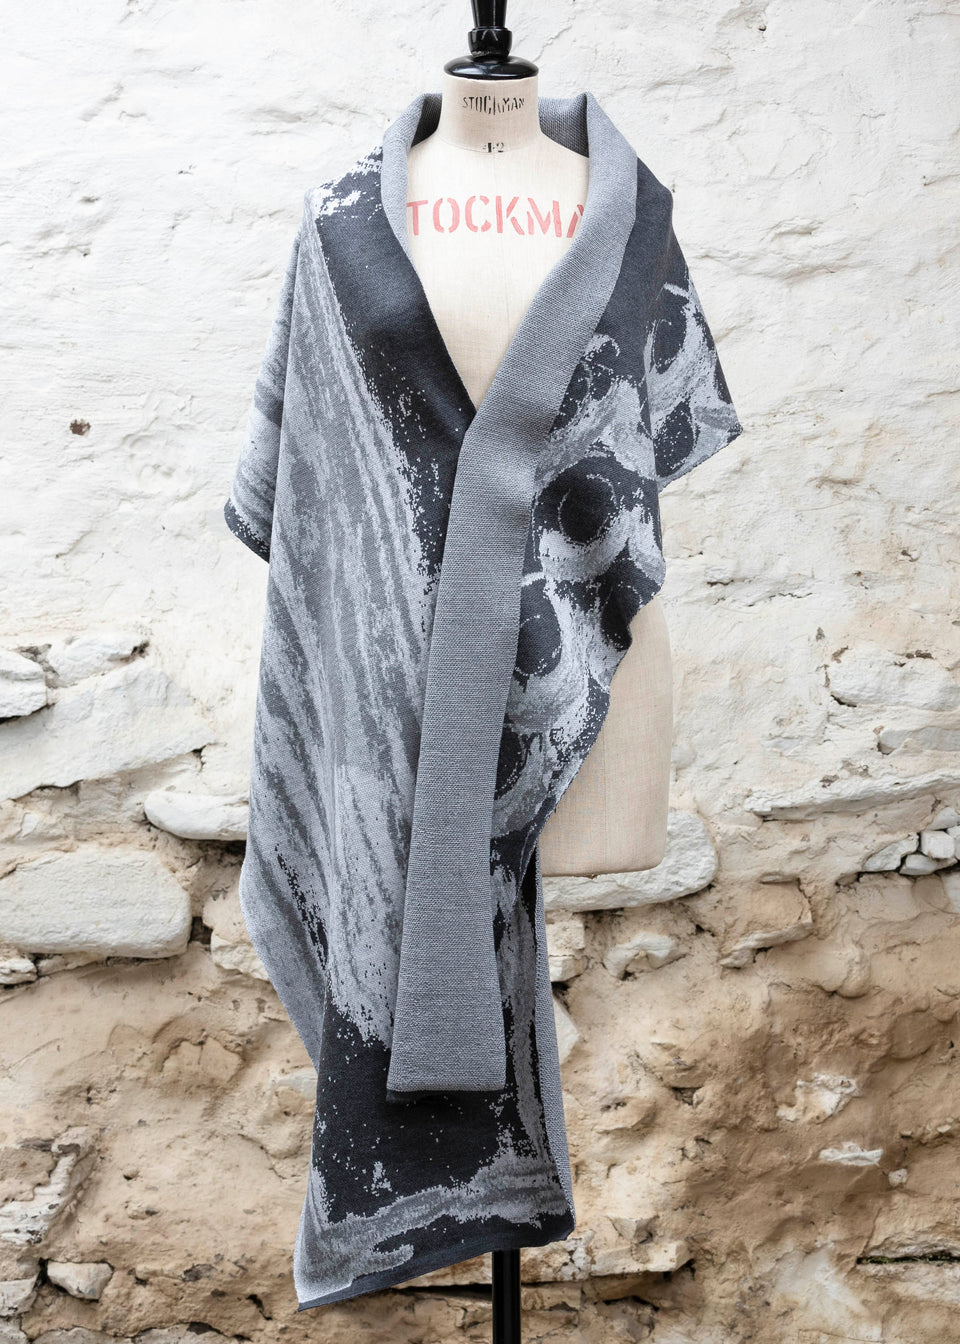 Finely knitted shawl in luxurious merino, made in Scotland. Shown on a vintage mannequin against a whitewashed wall. Abstract design in sea greys with curvilinear motifs. Draped to show whole shawl from the front.